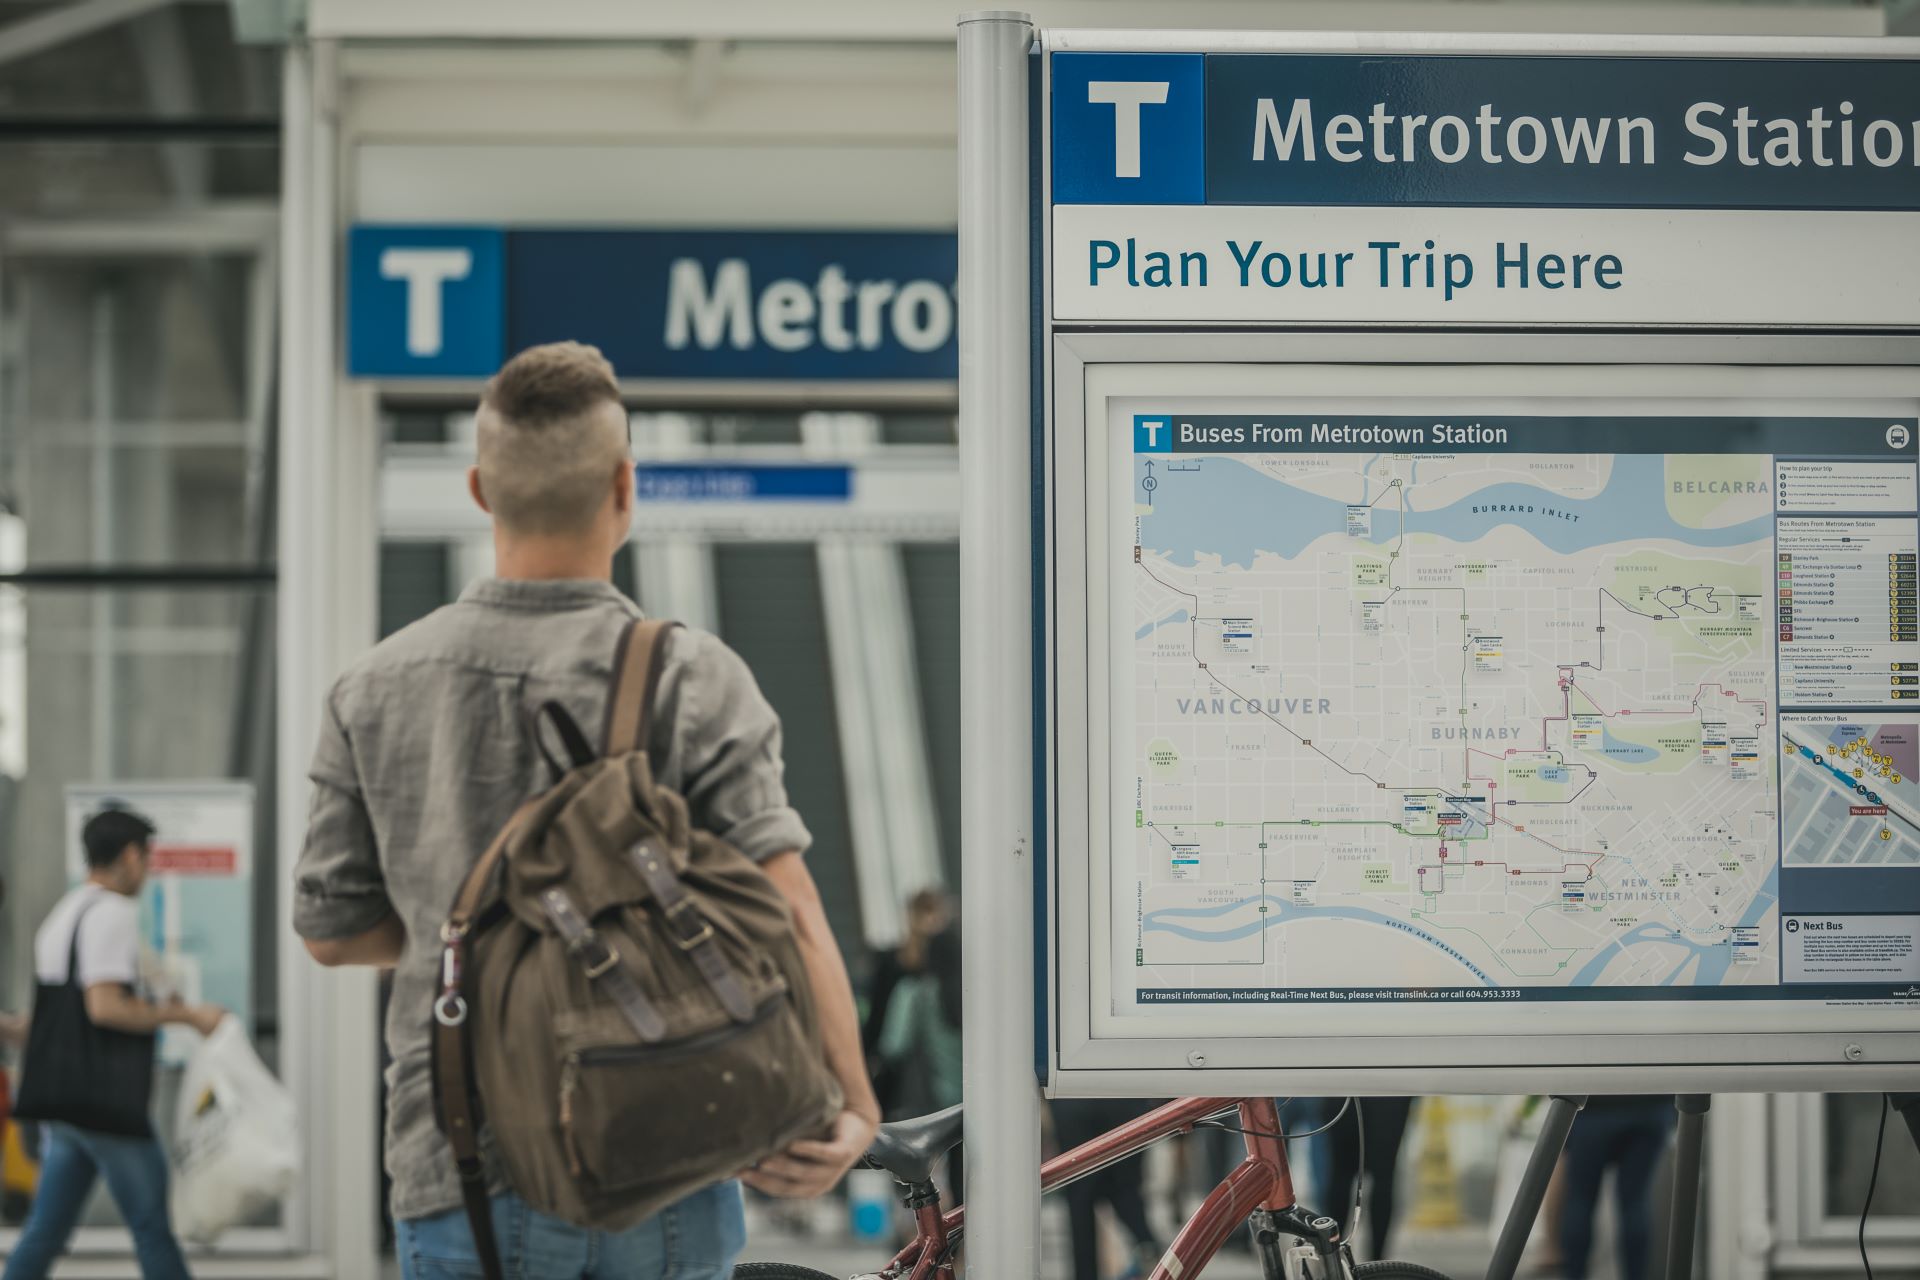 Customer looking at maps outside Metrotown Station for trip planning